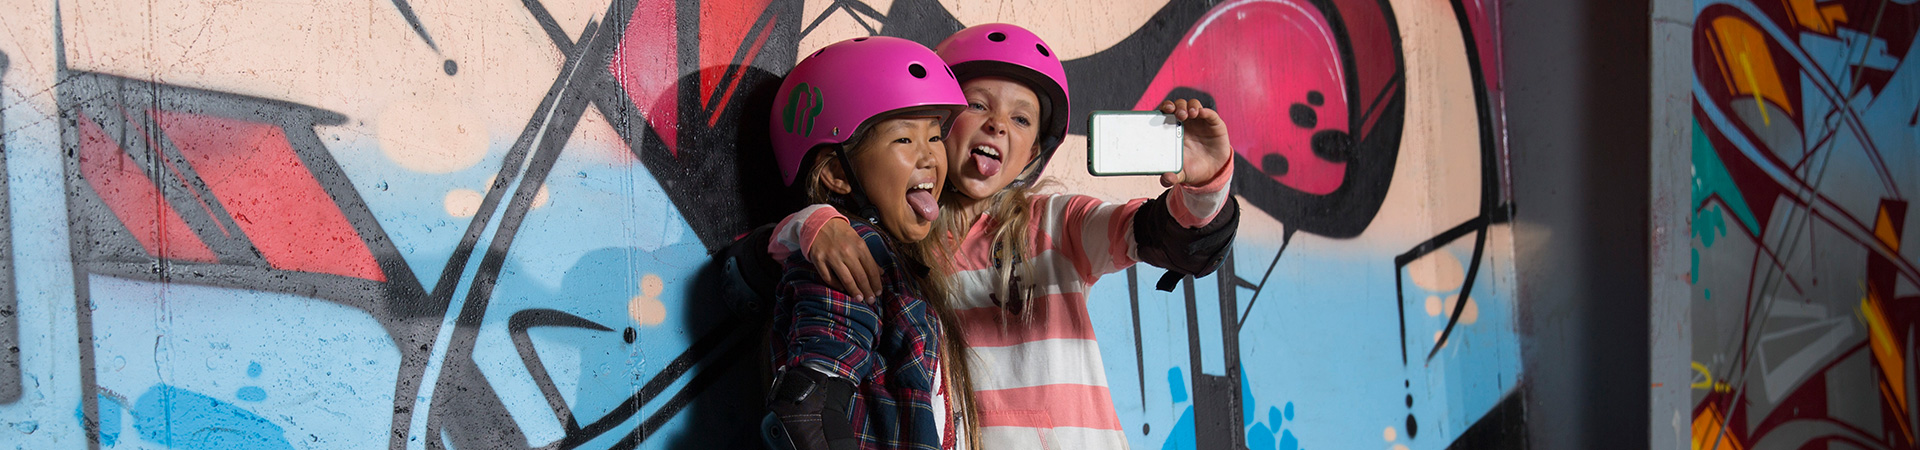  Two skater girls taking a selfie in front of a graffiti wall 